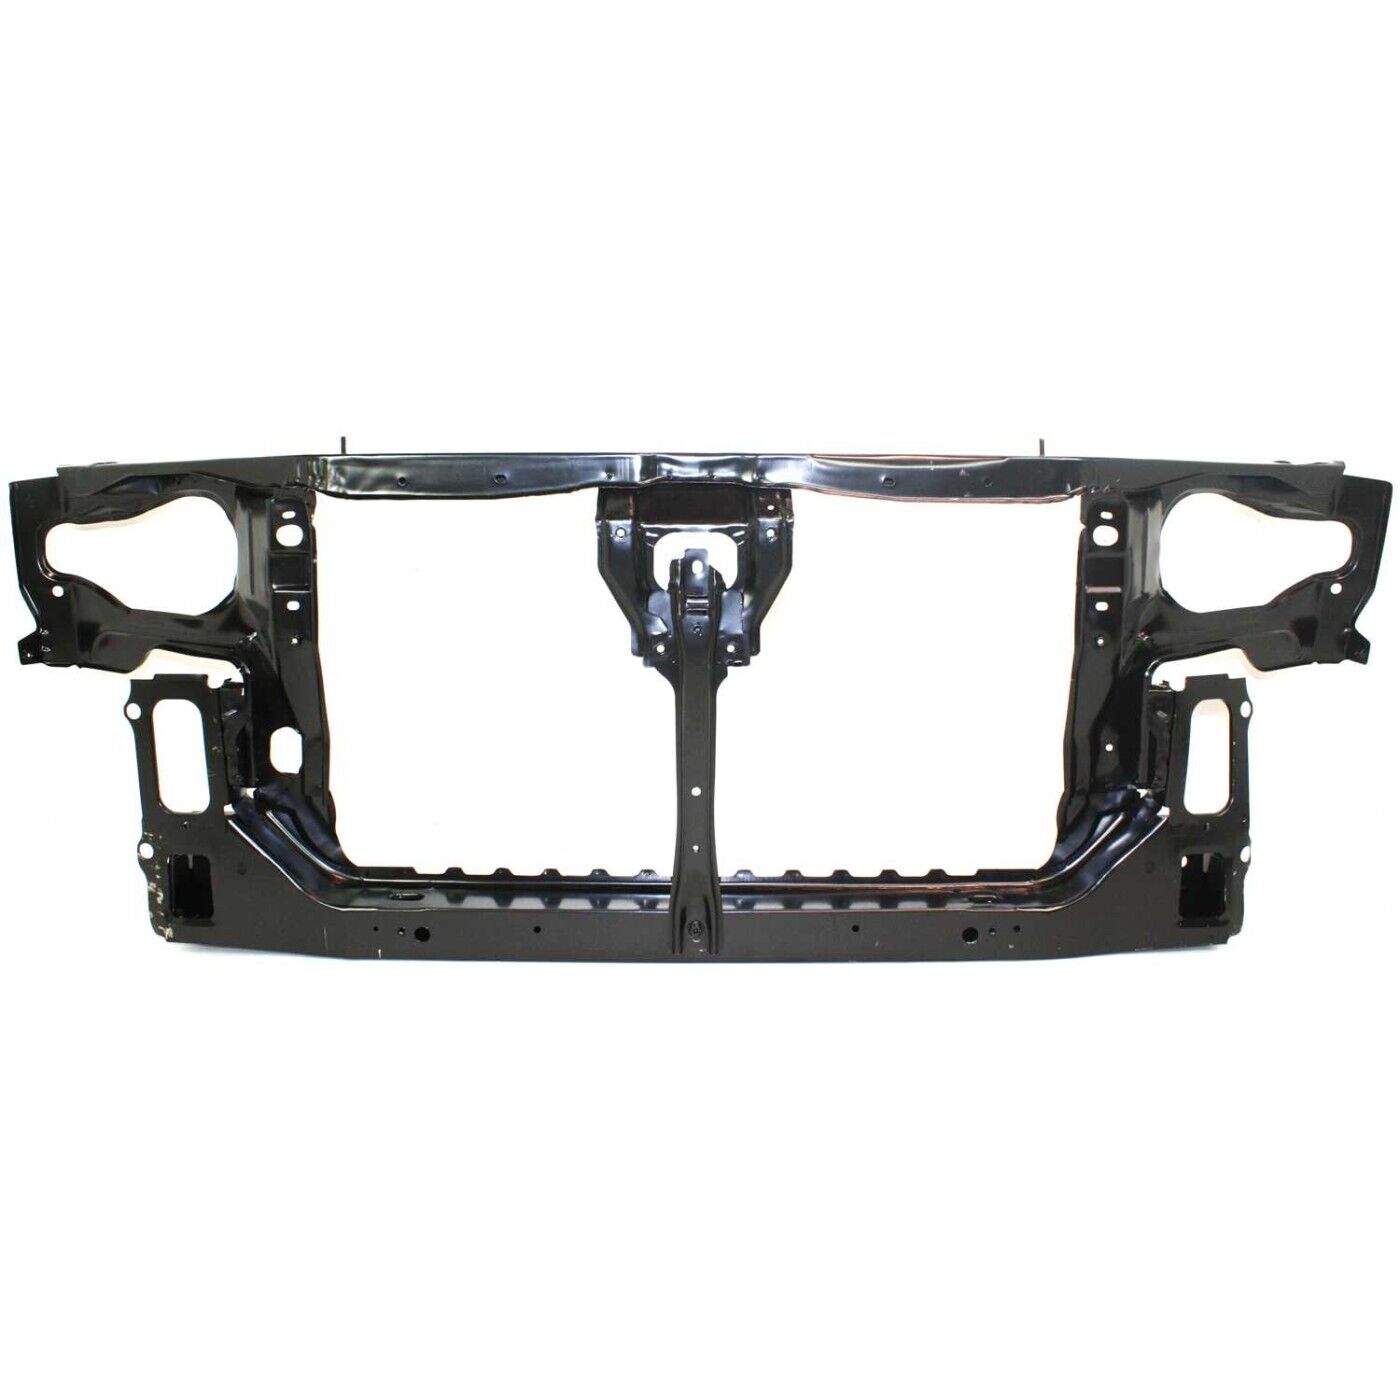 Radiator Support For 95-99 Nissan Maxima Assembly